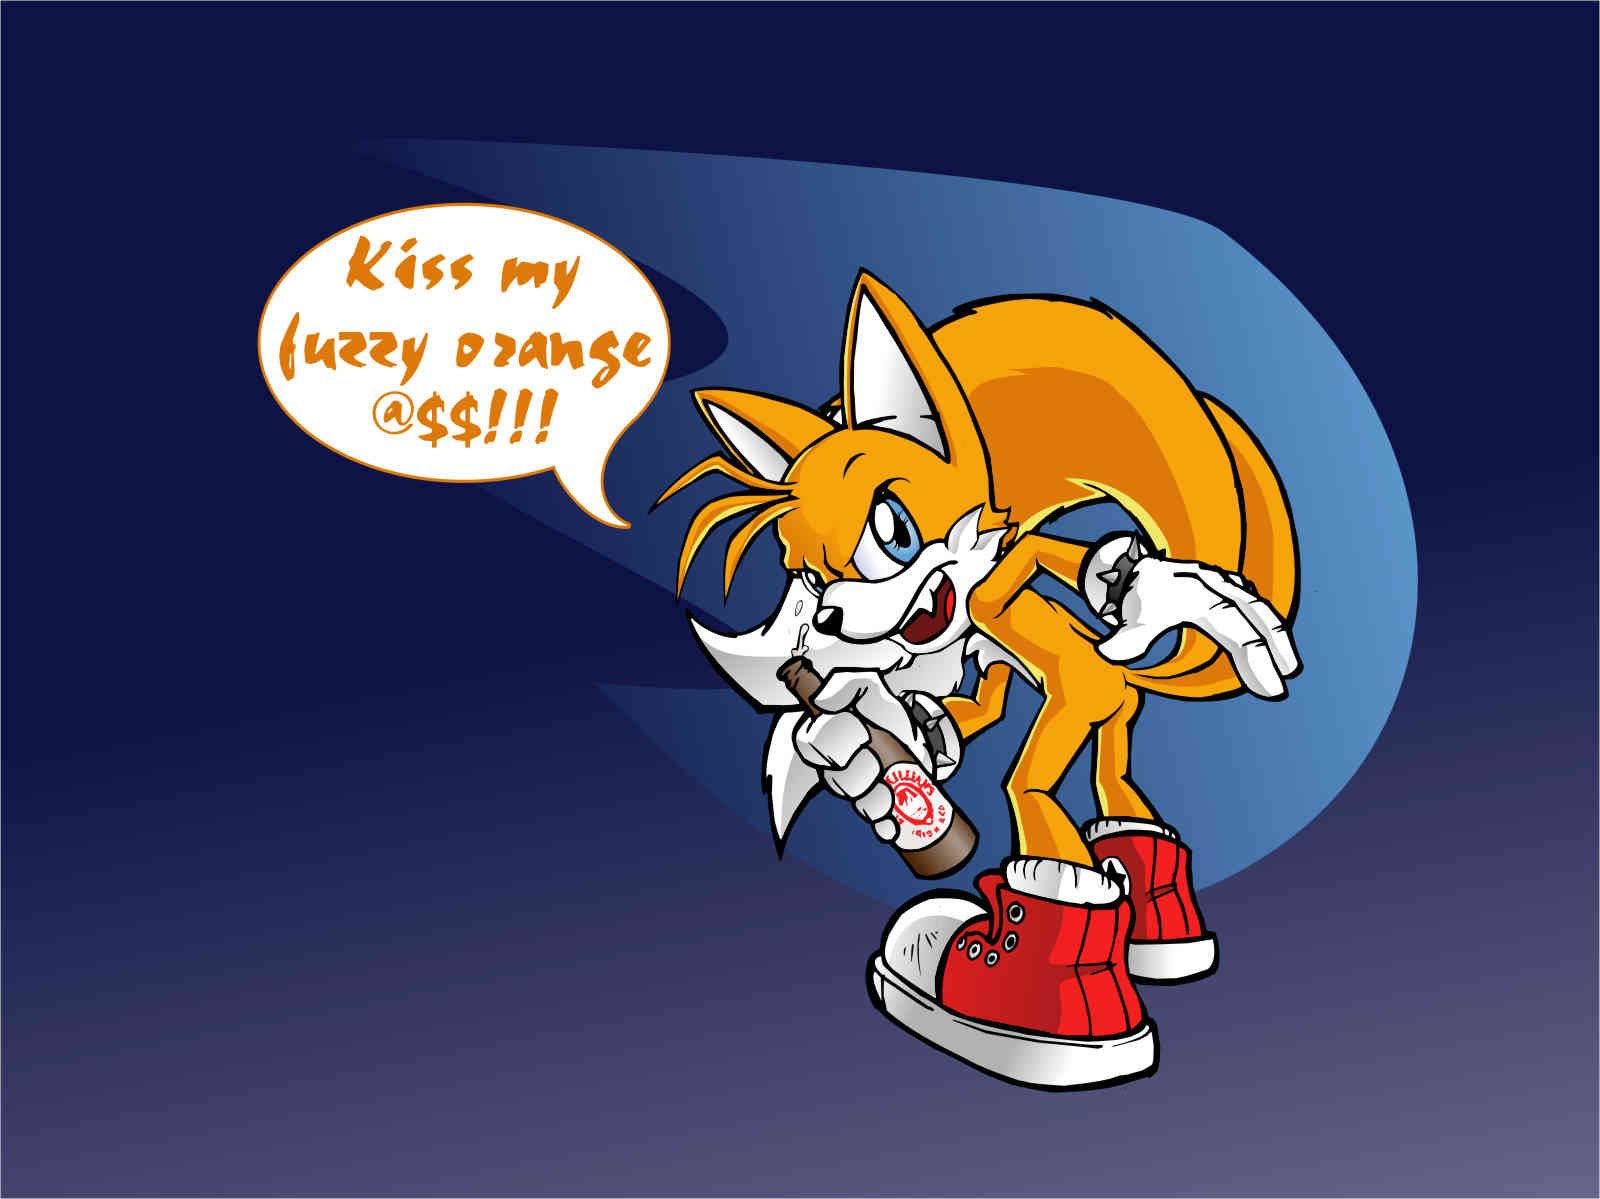 Tails.fed upwallpaper by tadhg on DeviantArt